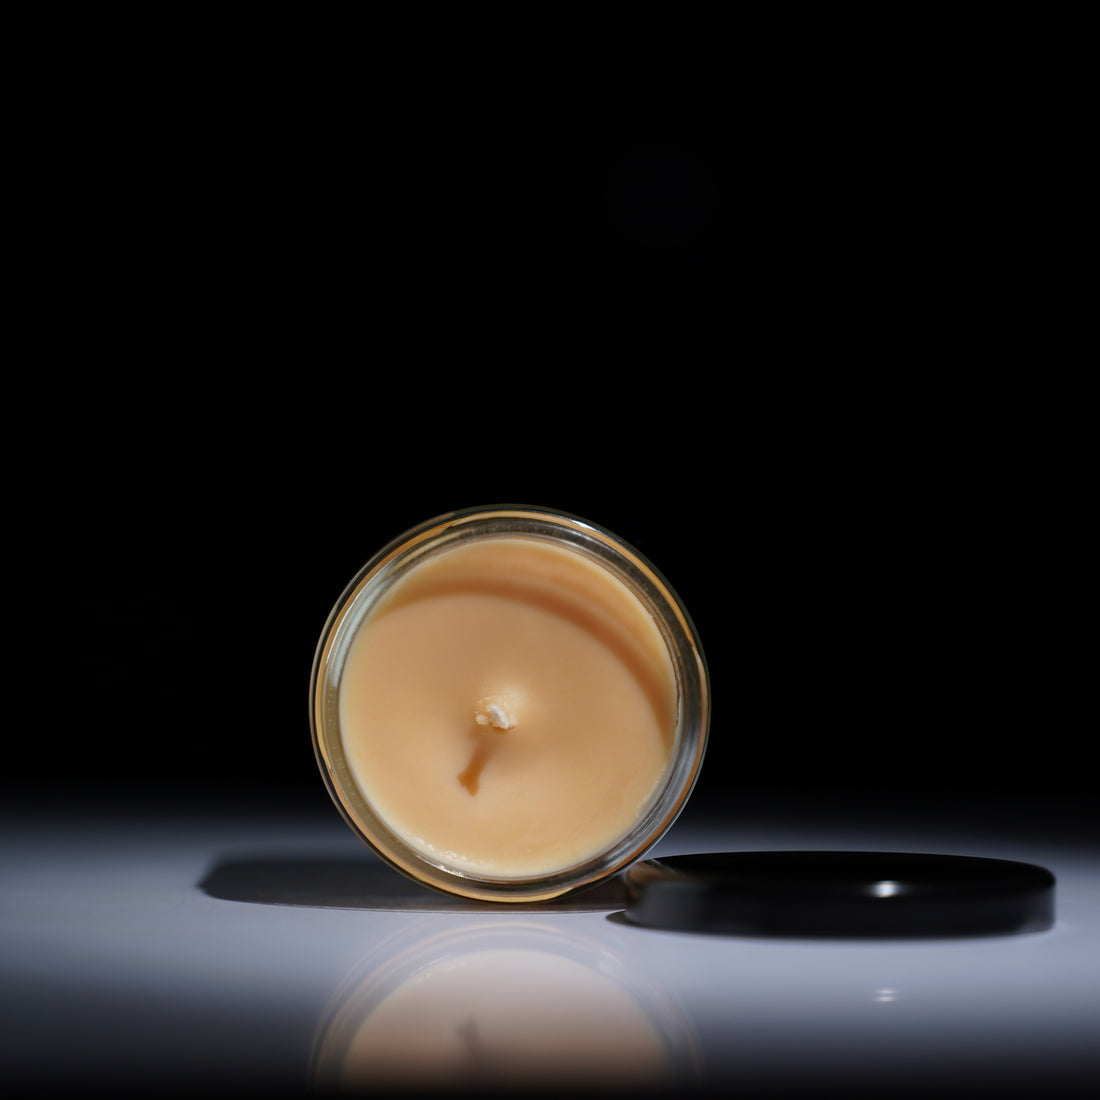 Cocoa Butter Cashmere candle